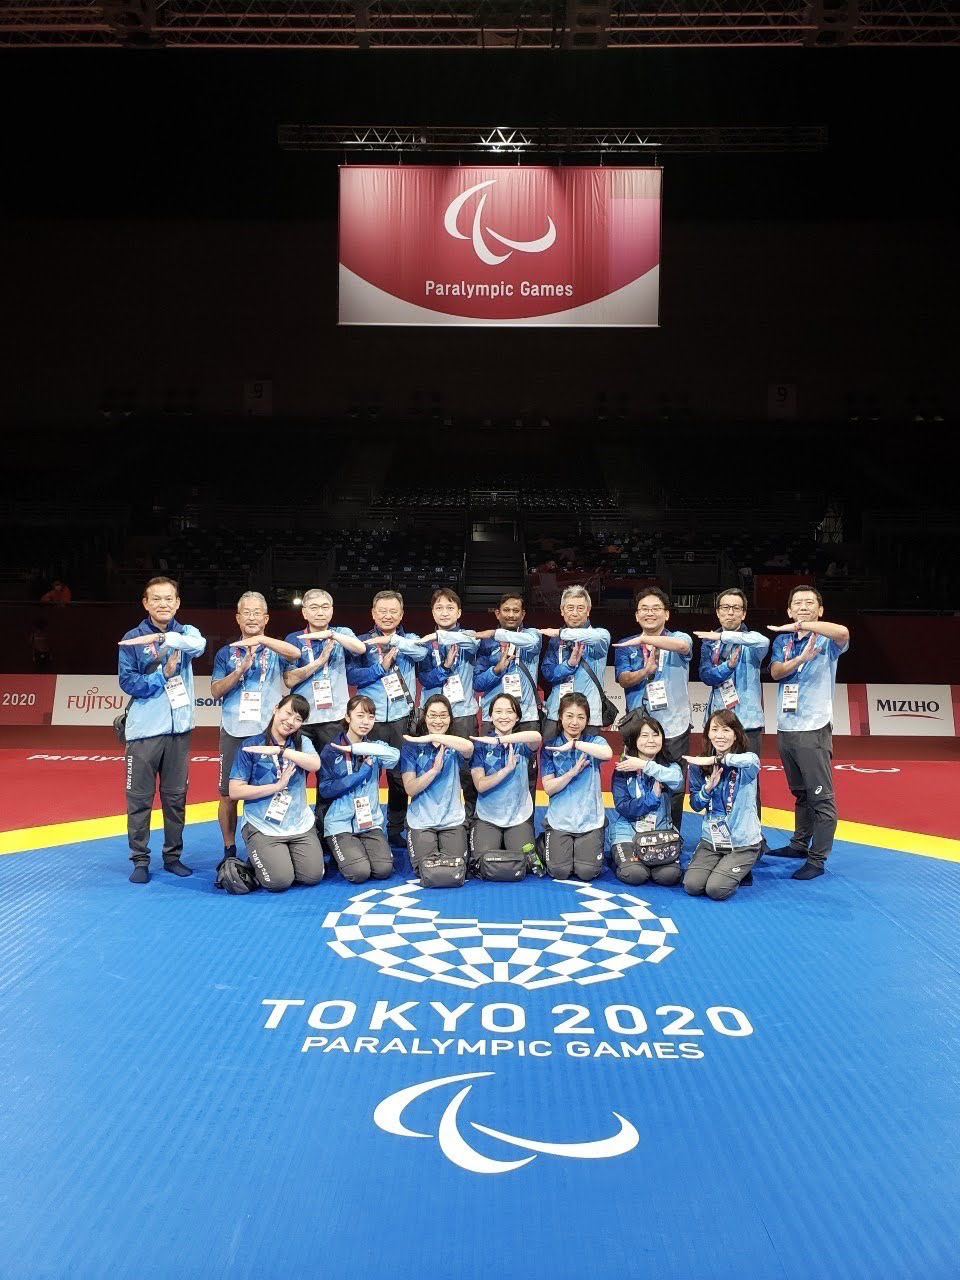 Taekwondo volunteers for the Tokyo 2020 Paralympic Games. Tarumi is on the far left.